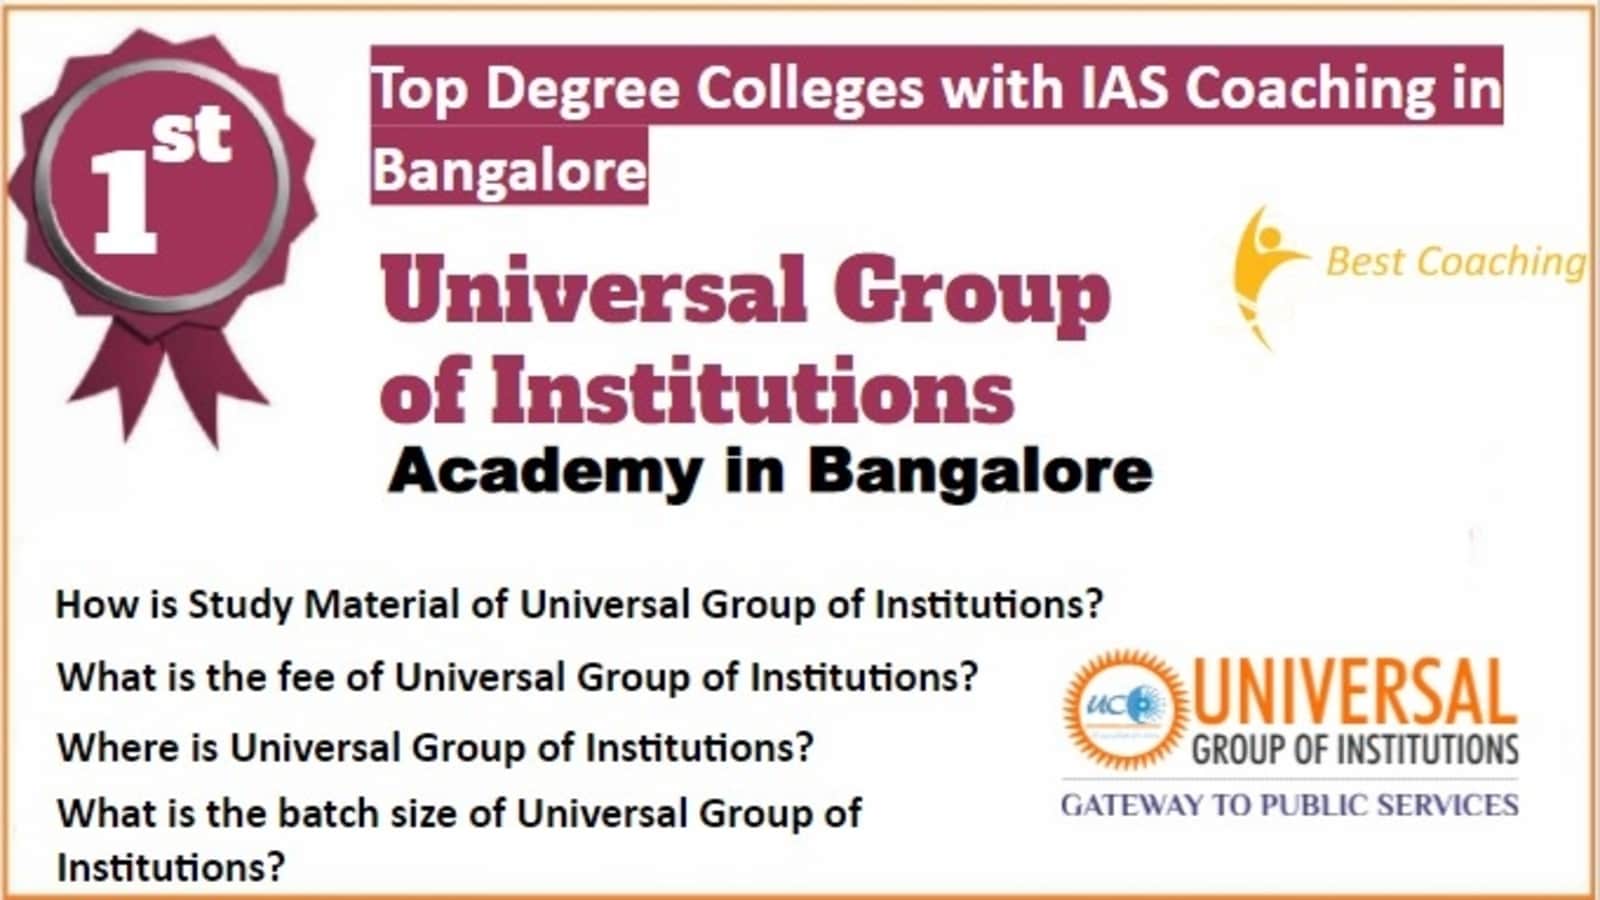 Rank 1 Best Degree Colleges with IAS Coaching in Bangalore